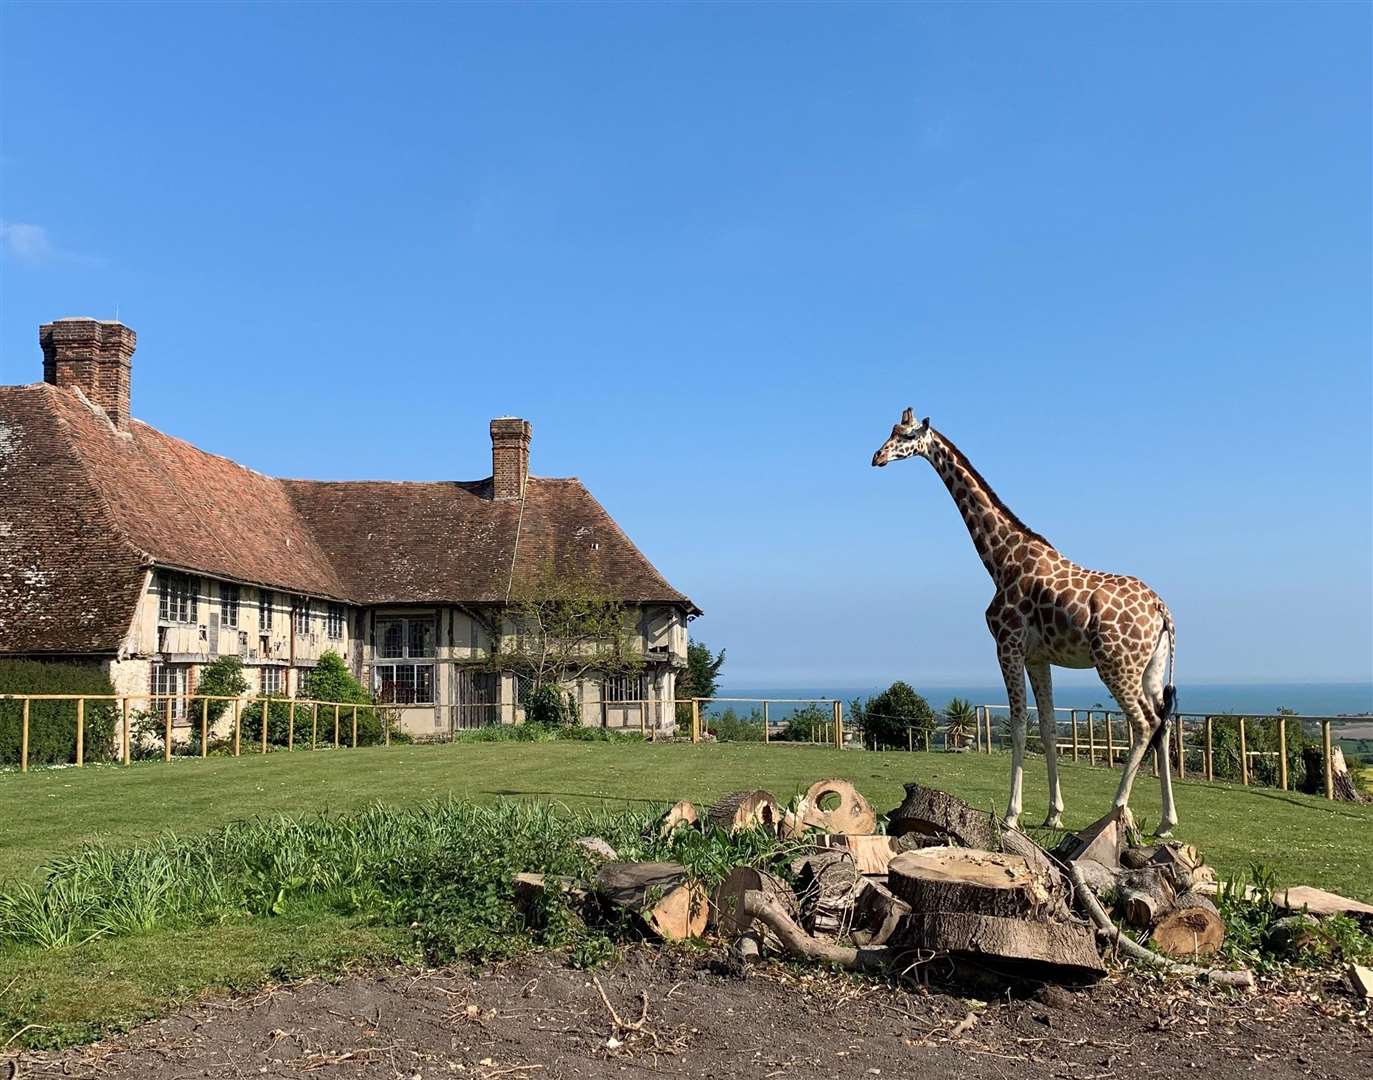 Giraffe Hall at Port Lympne Hotel and Reserve is expected to launch 2021